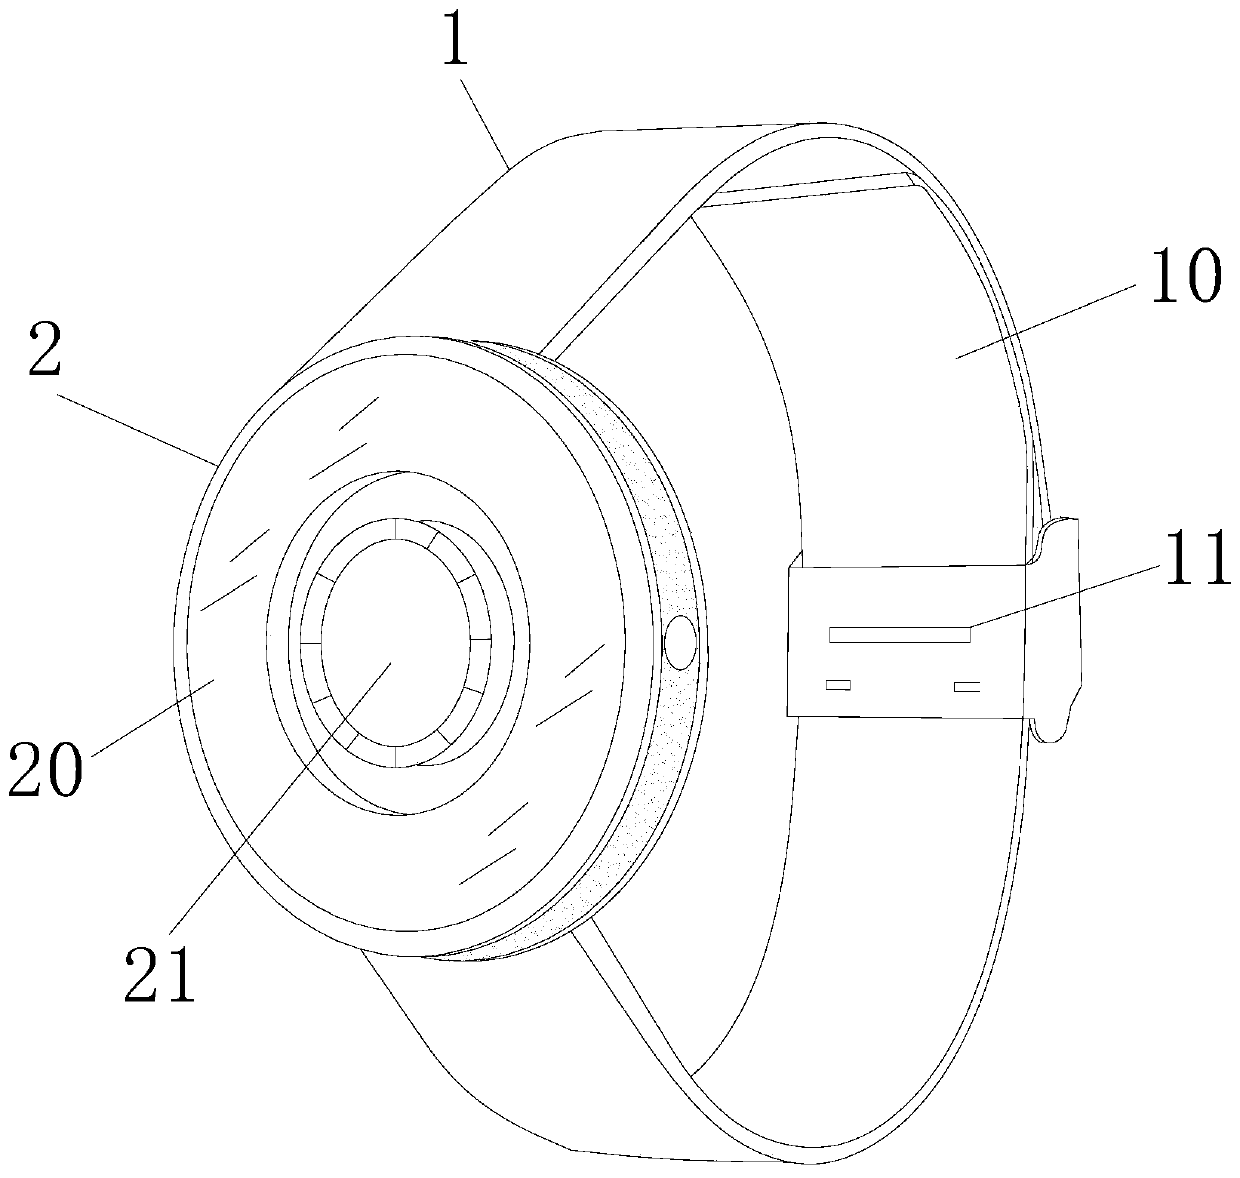 Novel smartwatch capable of changing dial plate appearance based on watch ring rotation